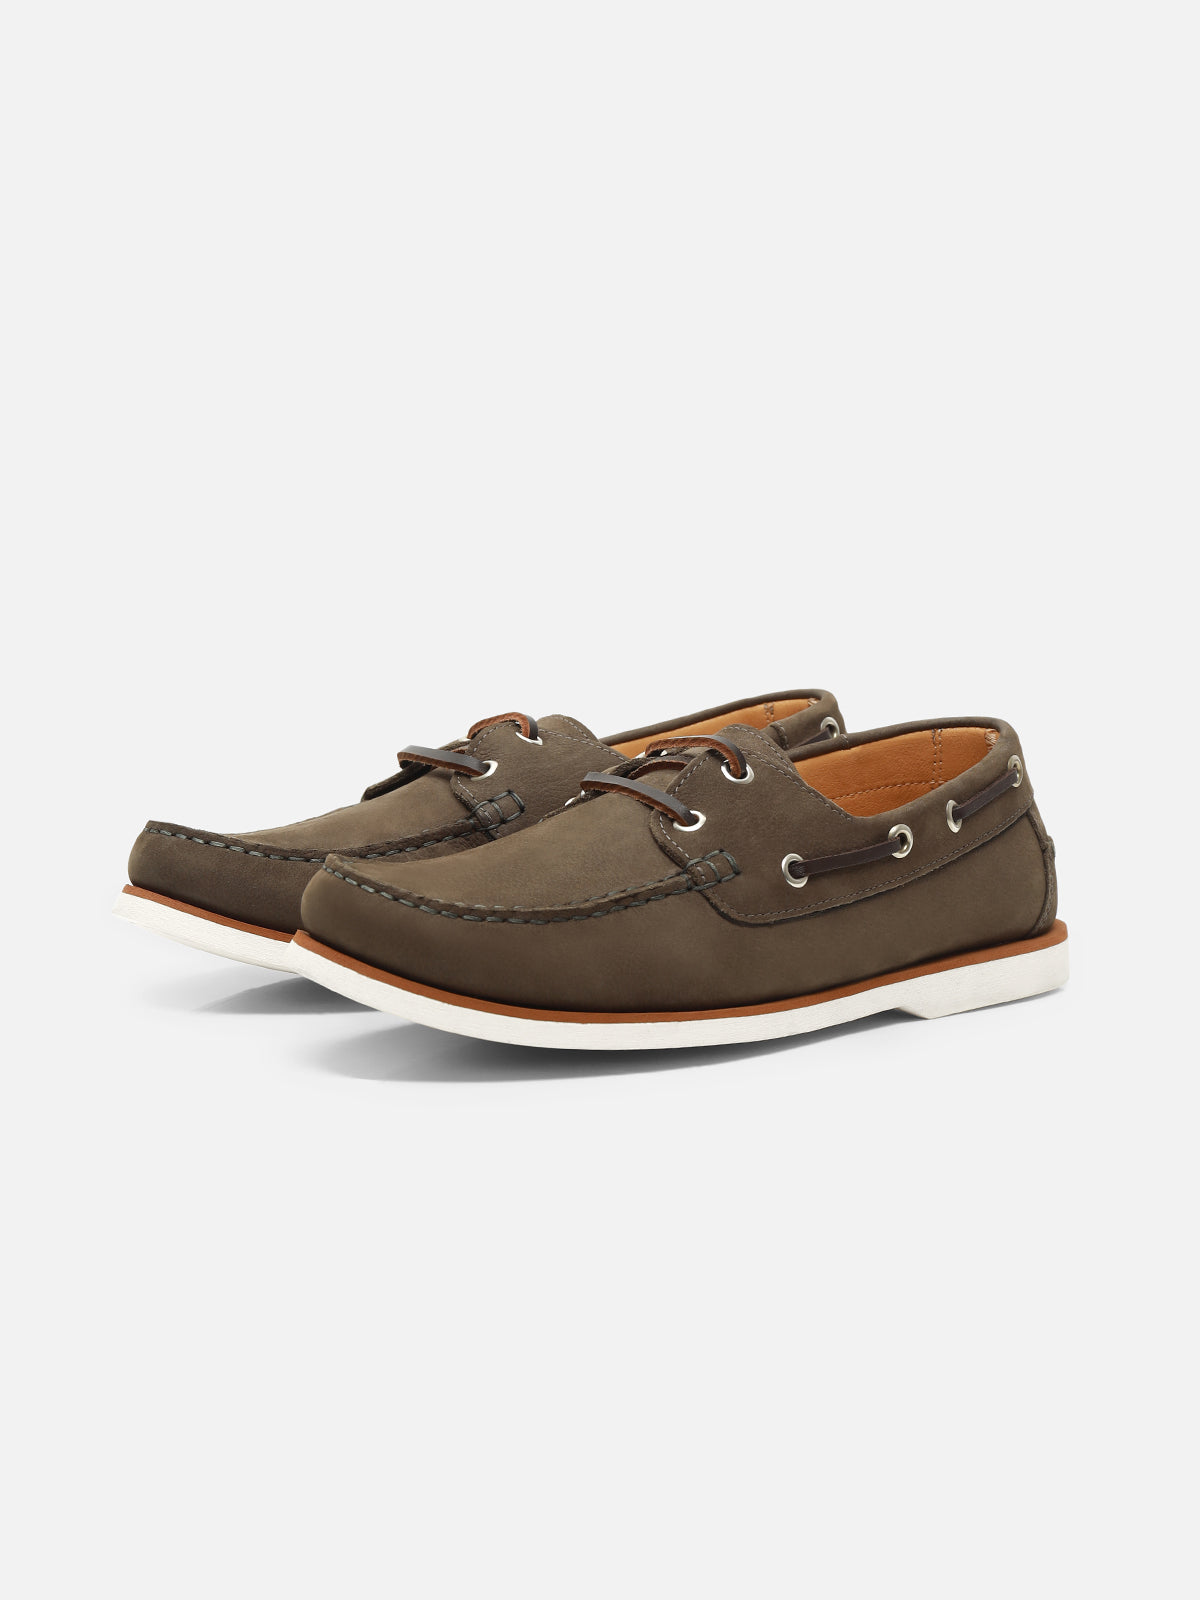 Leather Boat Shoe - FAMS24-051